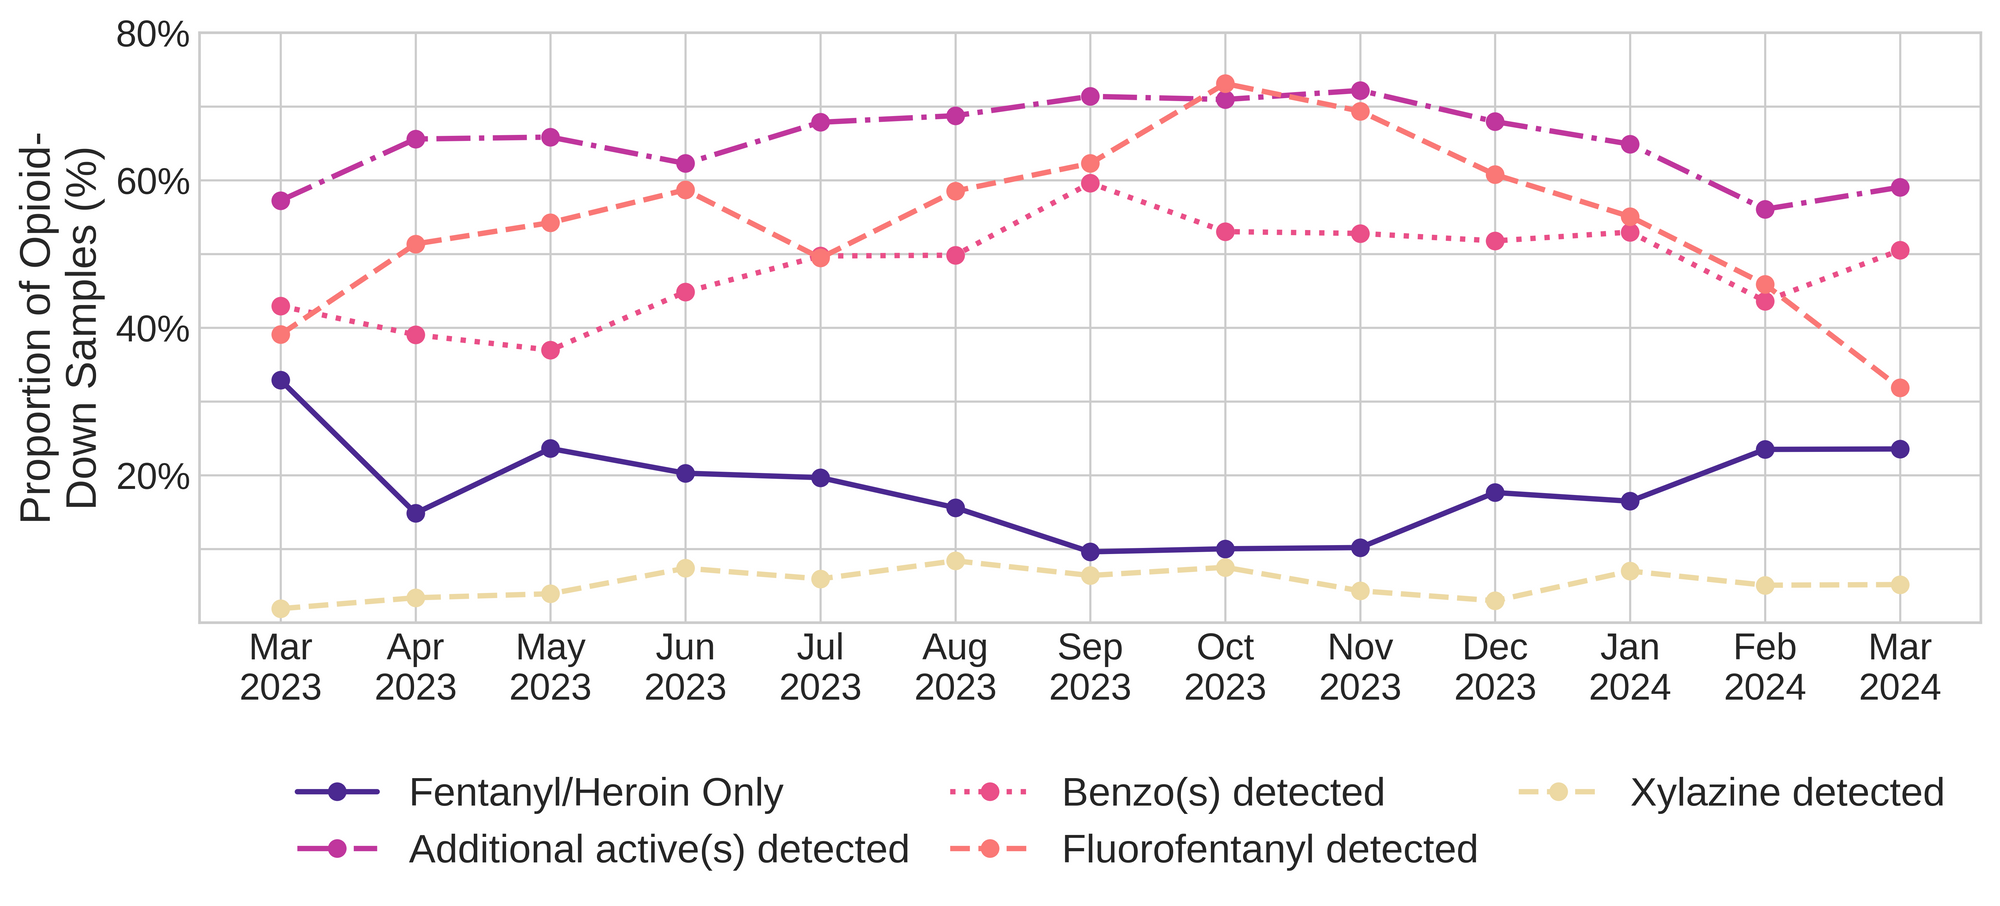 Figure 3. The percentage of expected opioid-down samples checked between March 2023 and March 2024 that only contained fentanyl/heroin actives (solid dark purple), opioid-down samples with an additional active detected (dot-dashed light purple), opioid-down samples that contained a benzodiazepine-related drug (dotted magenta), opioid-down samples that contained fluorofentanyl (dashed salmon), and opioid-down samples that contained xylazine (dashed yellow).